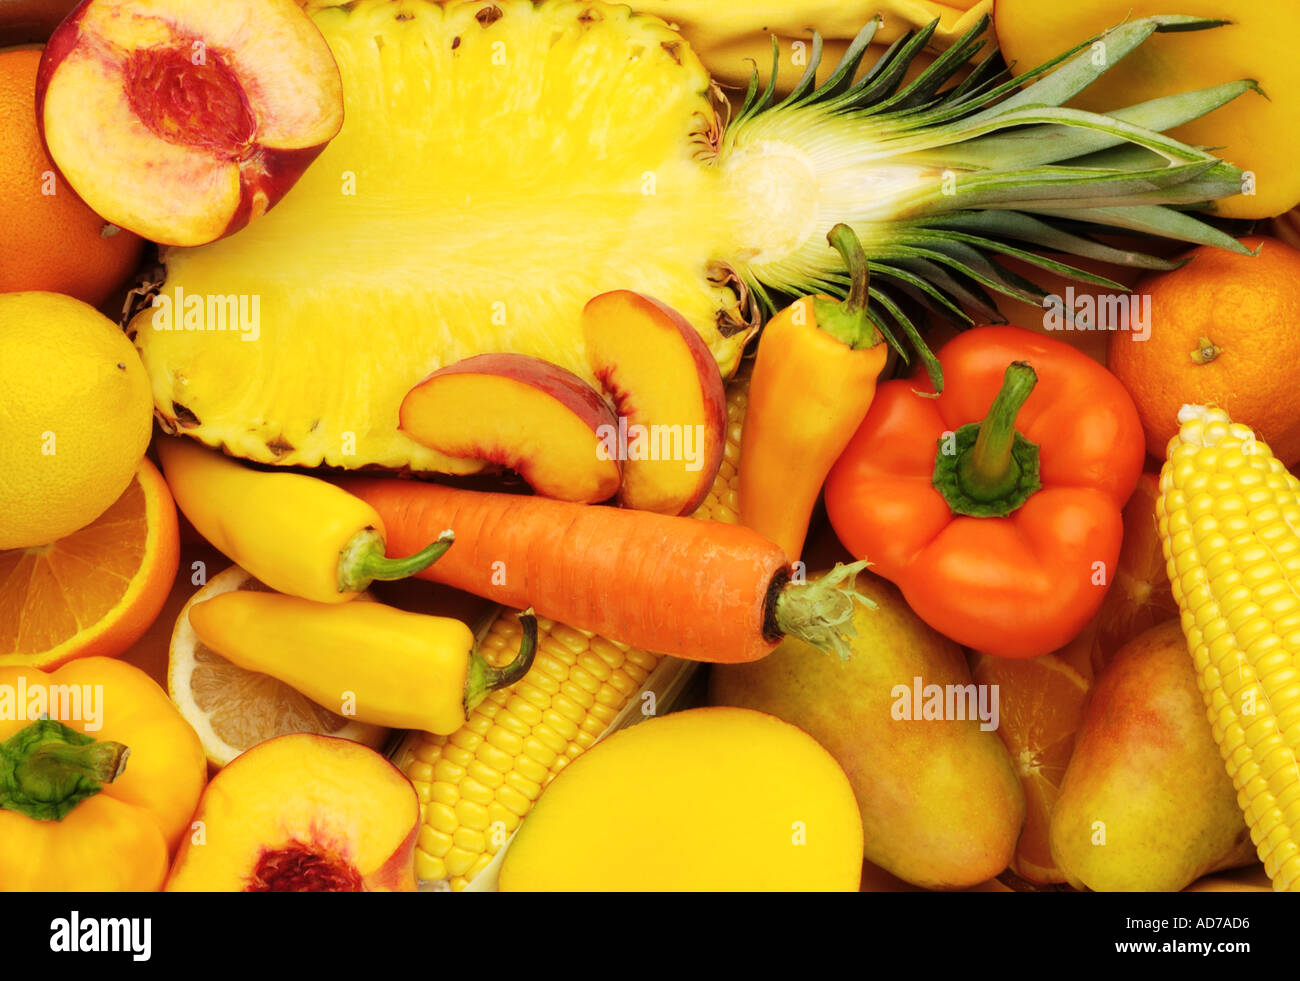 yellow and orange fruits and vegetables Stock Photo